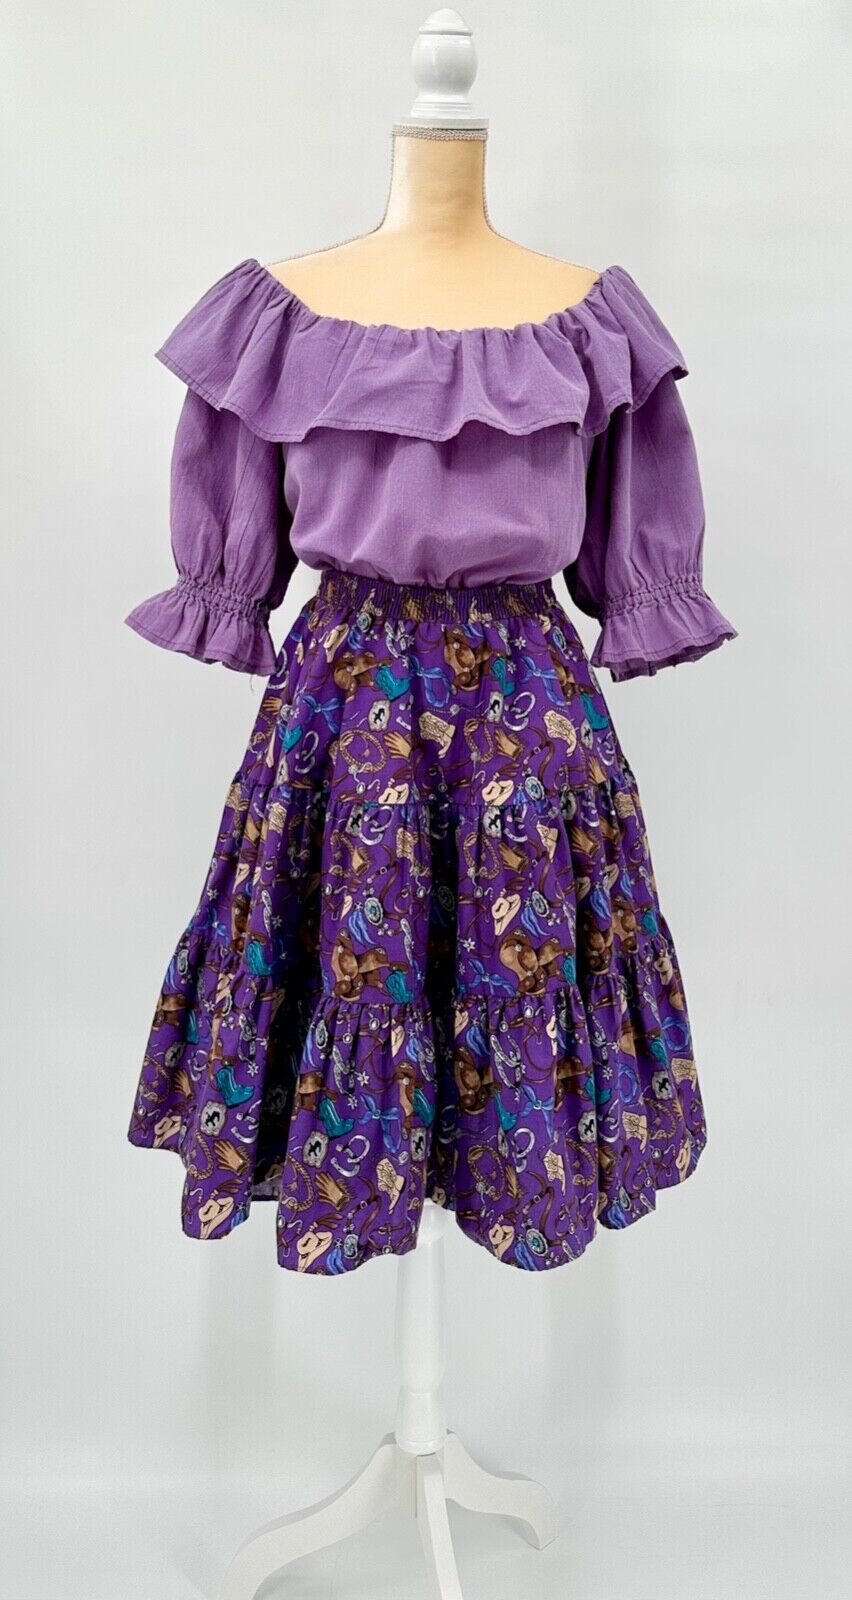 VTG Malco Modes Square Dance Set L Tiered Skirt & Peasant Blouse, Western Purple Malco Modes